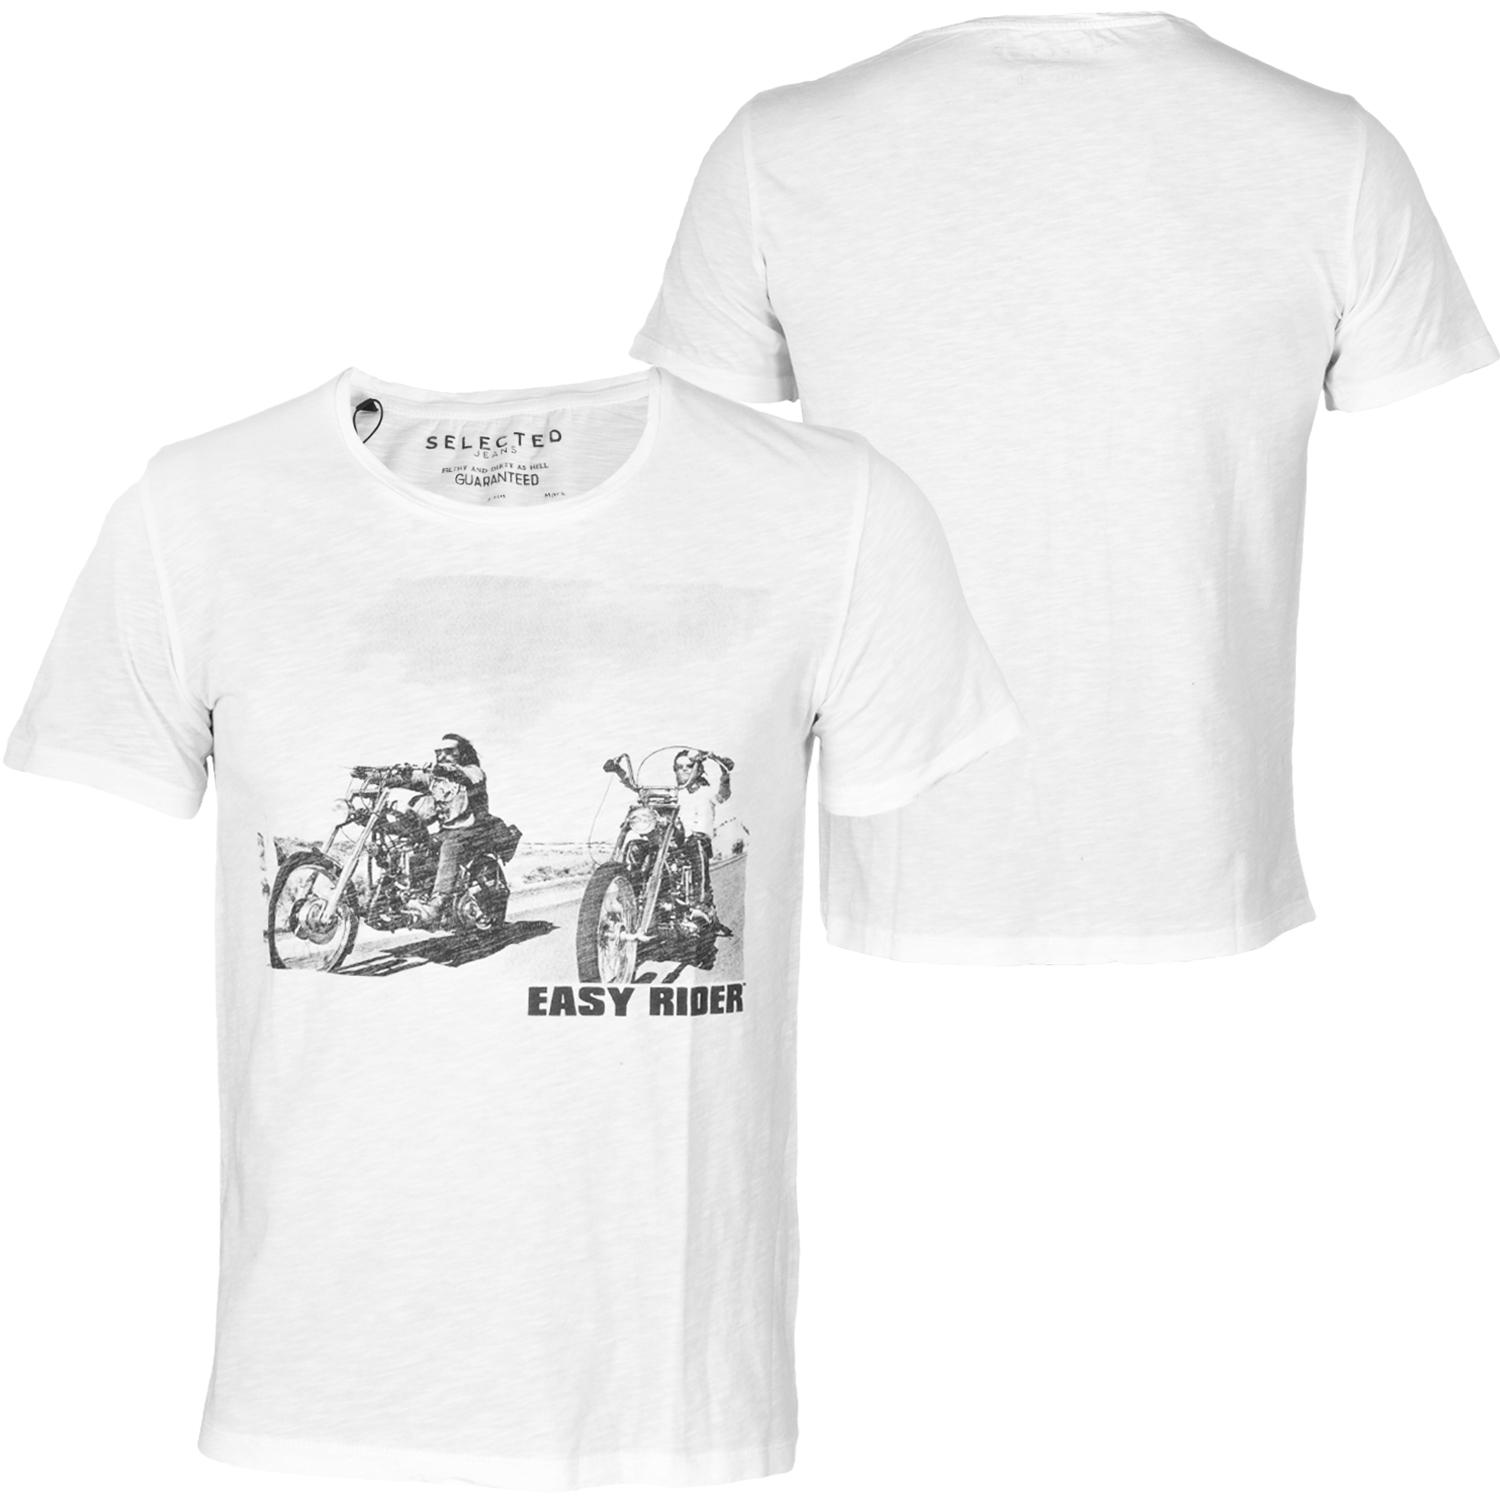 Foto Selected Easy Rider O-neck T-shirt Blanco